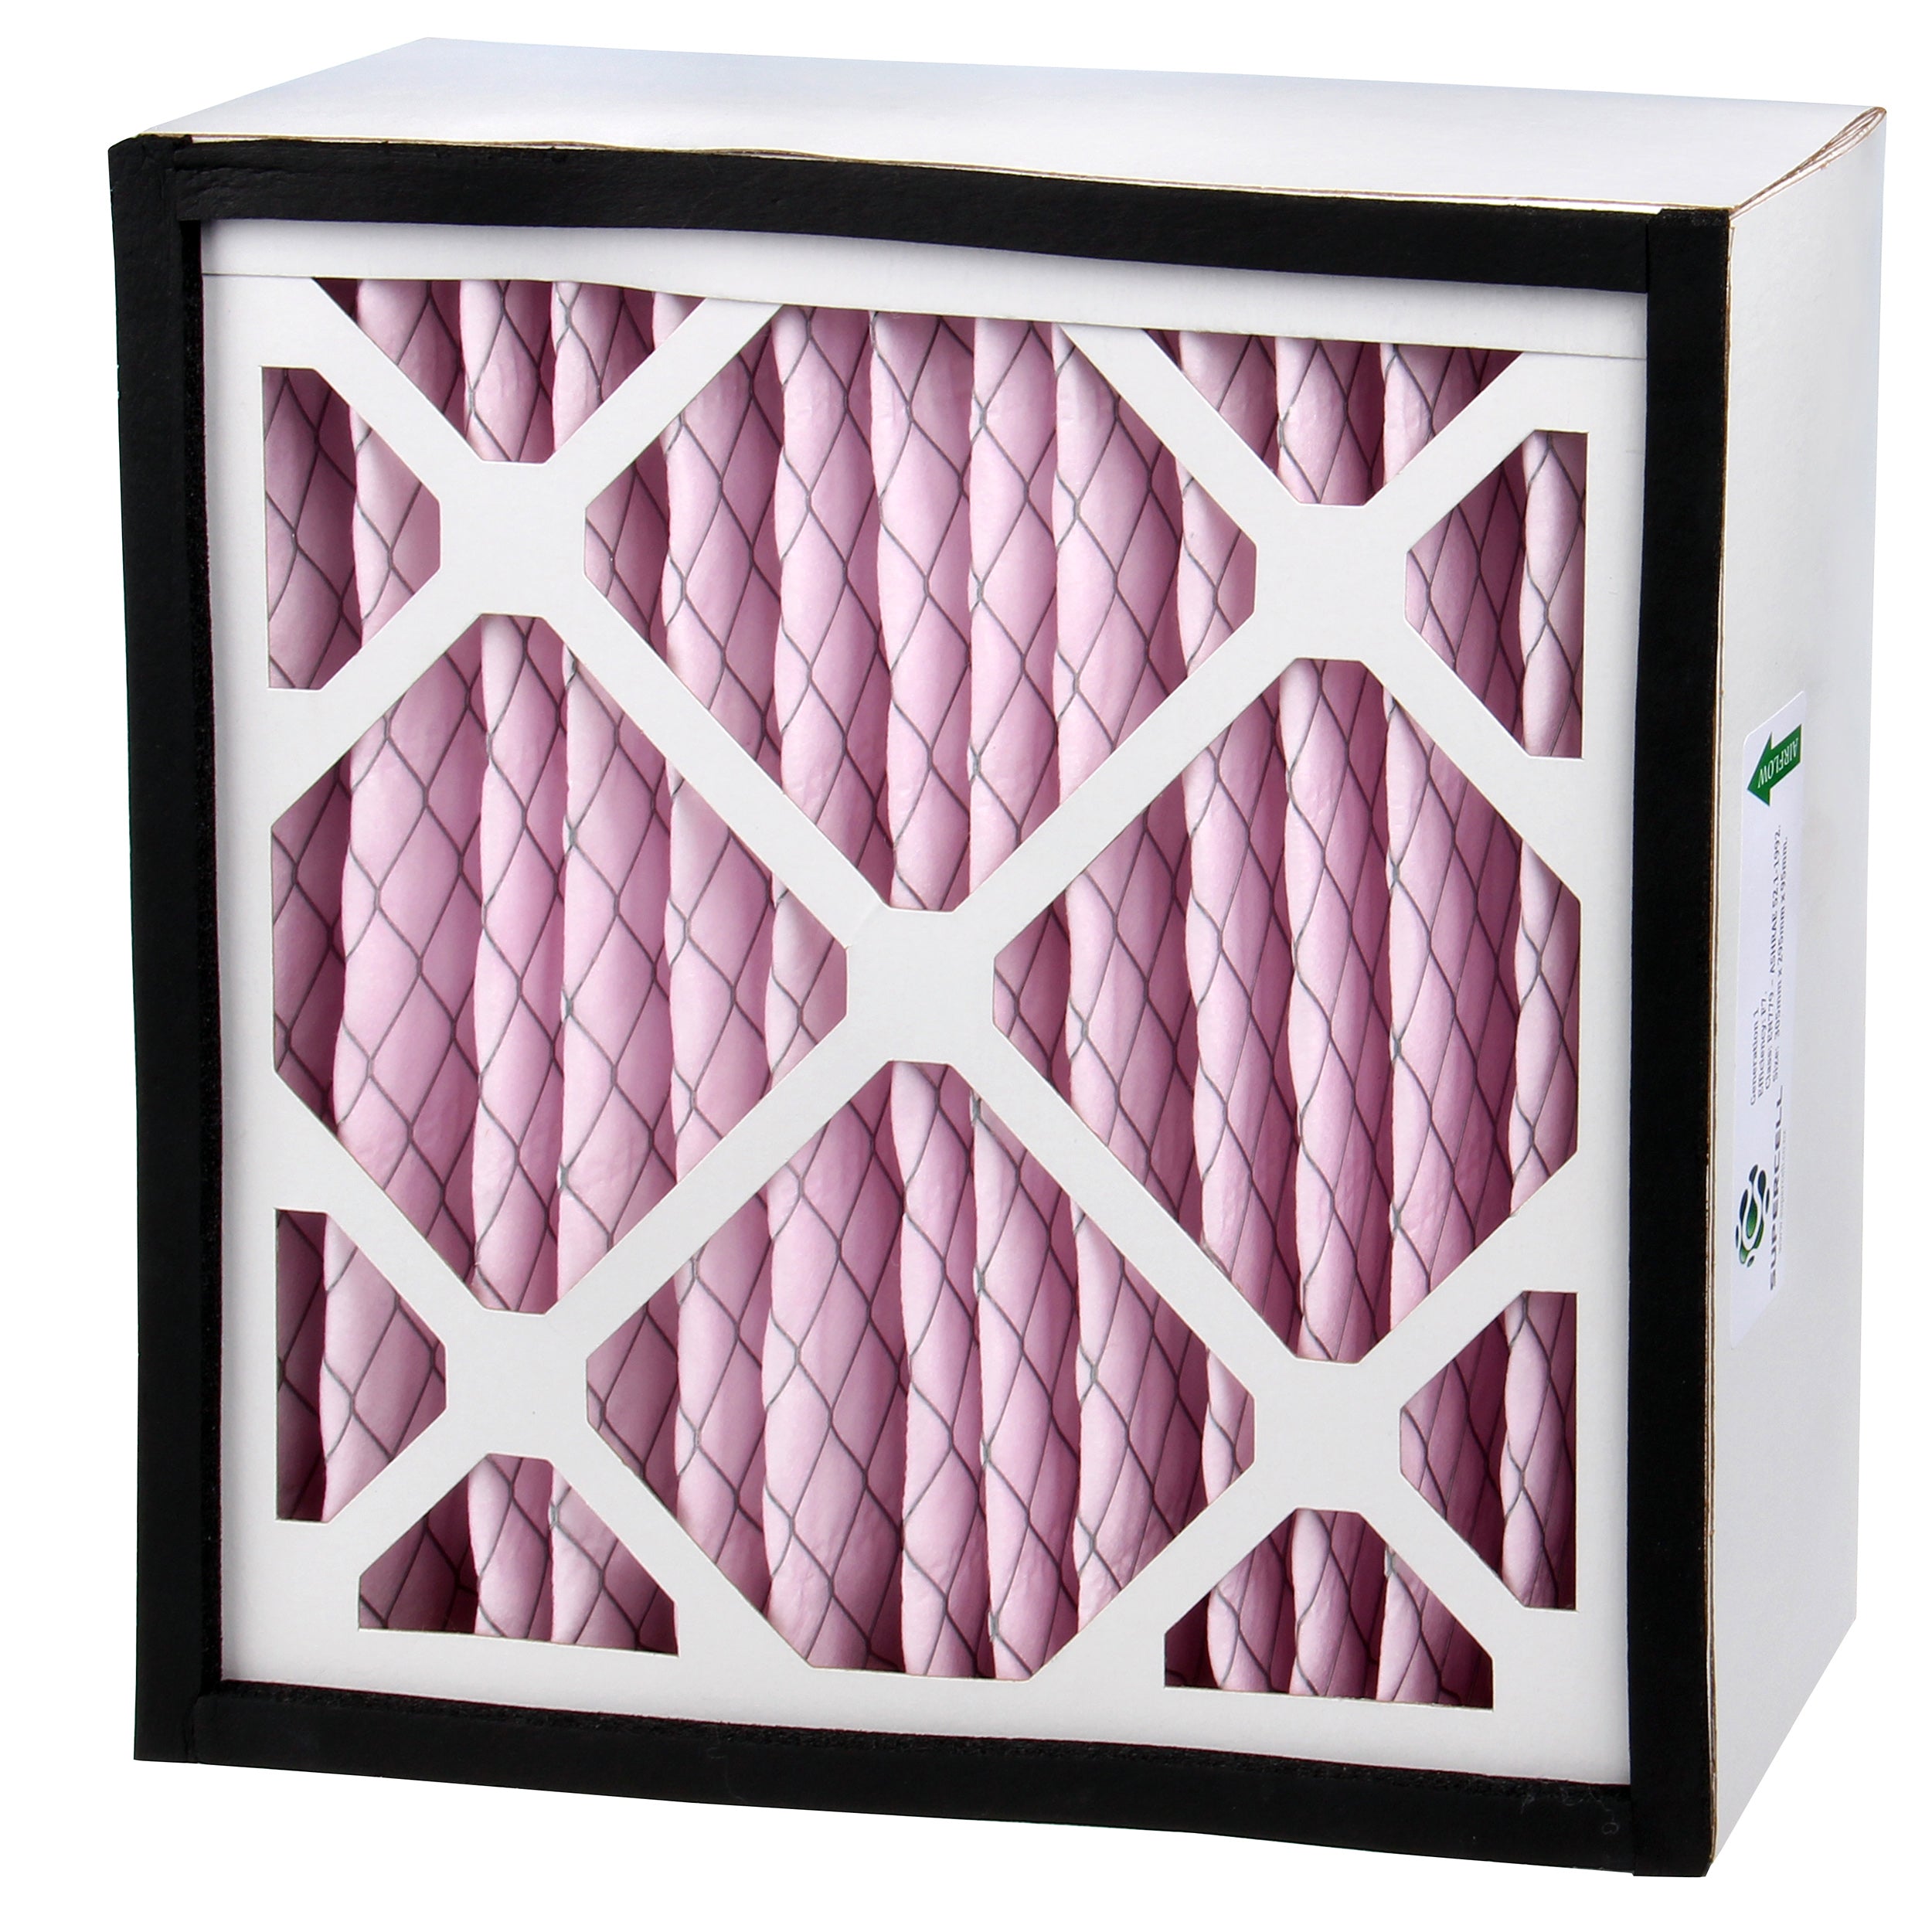 Ventilation filters for the New Year